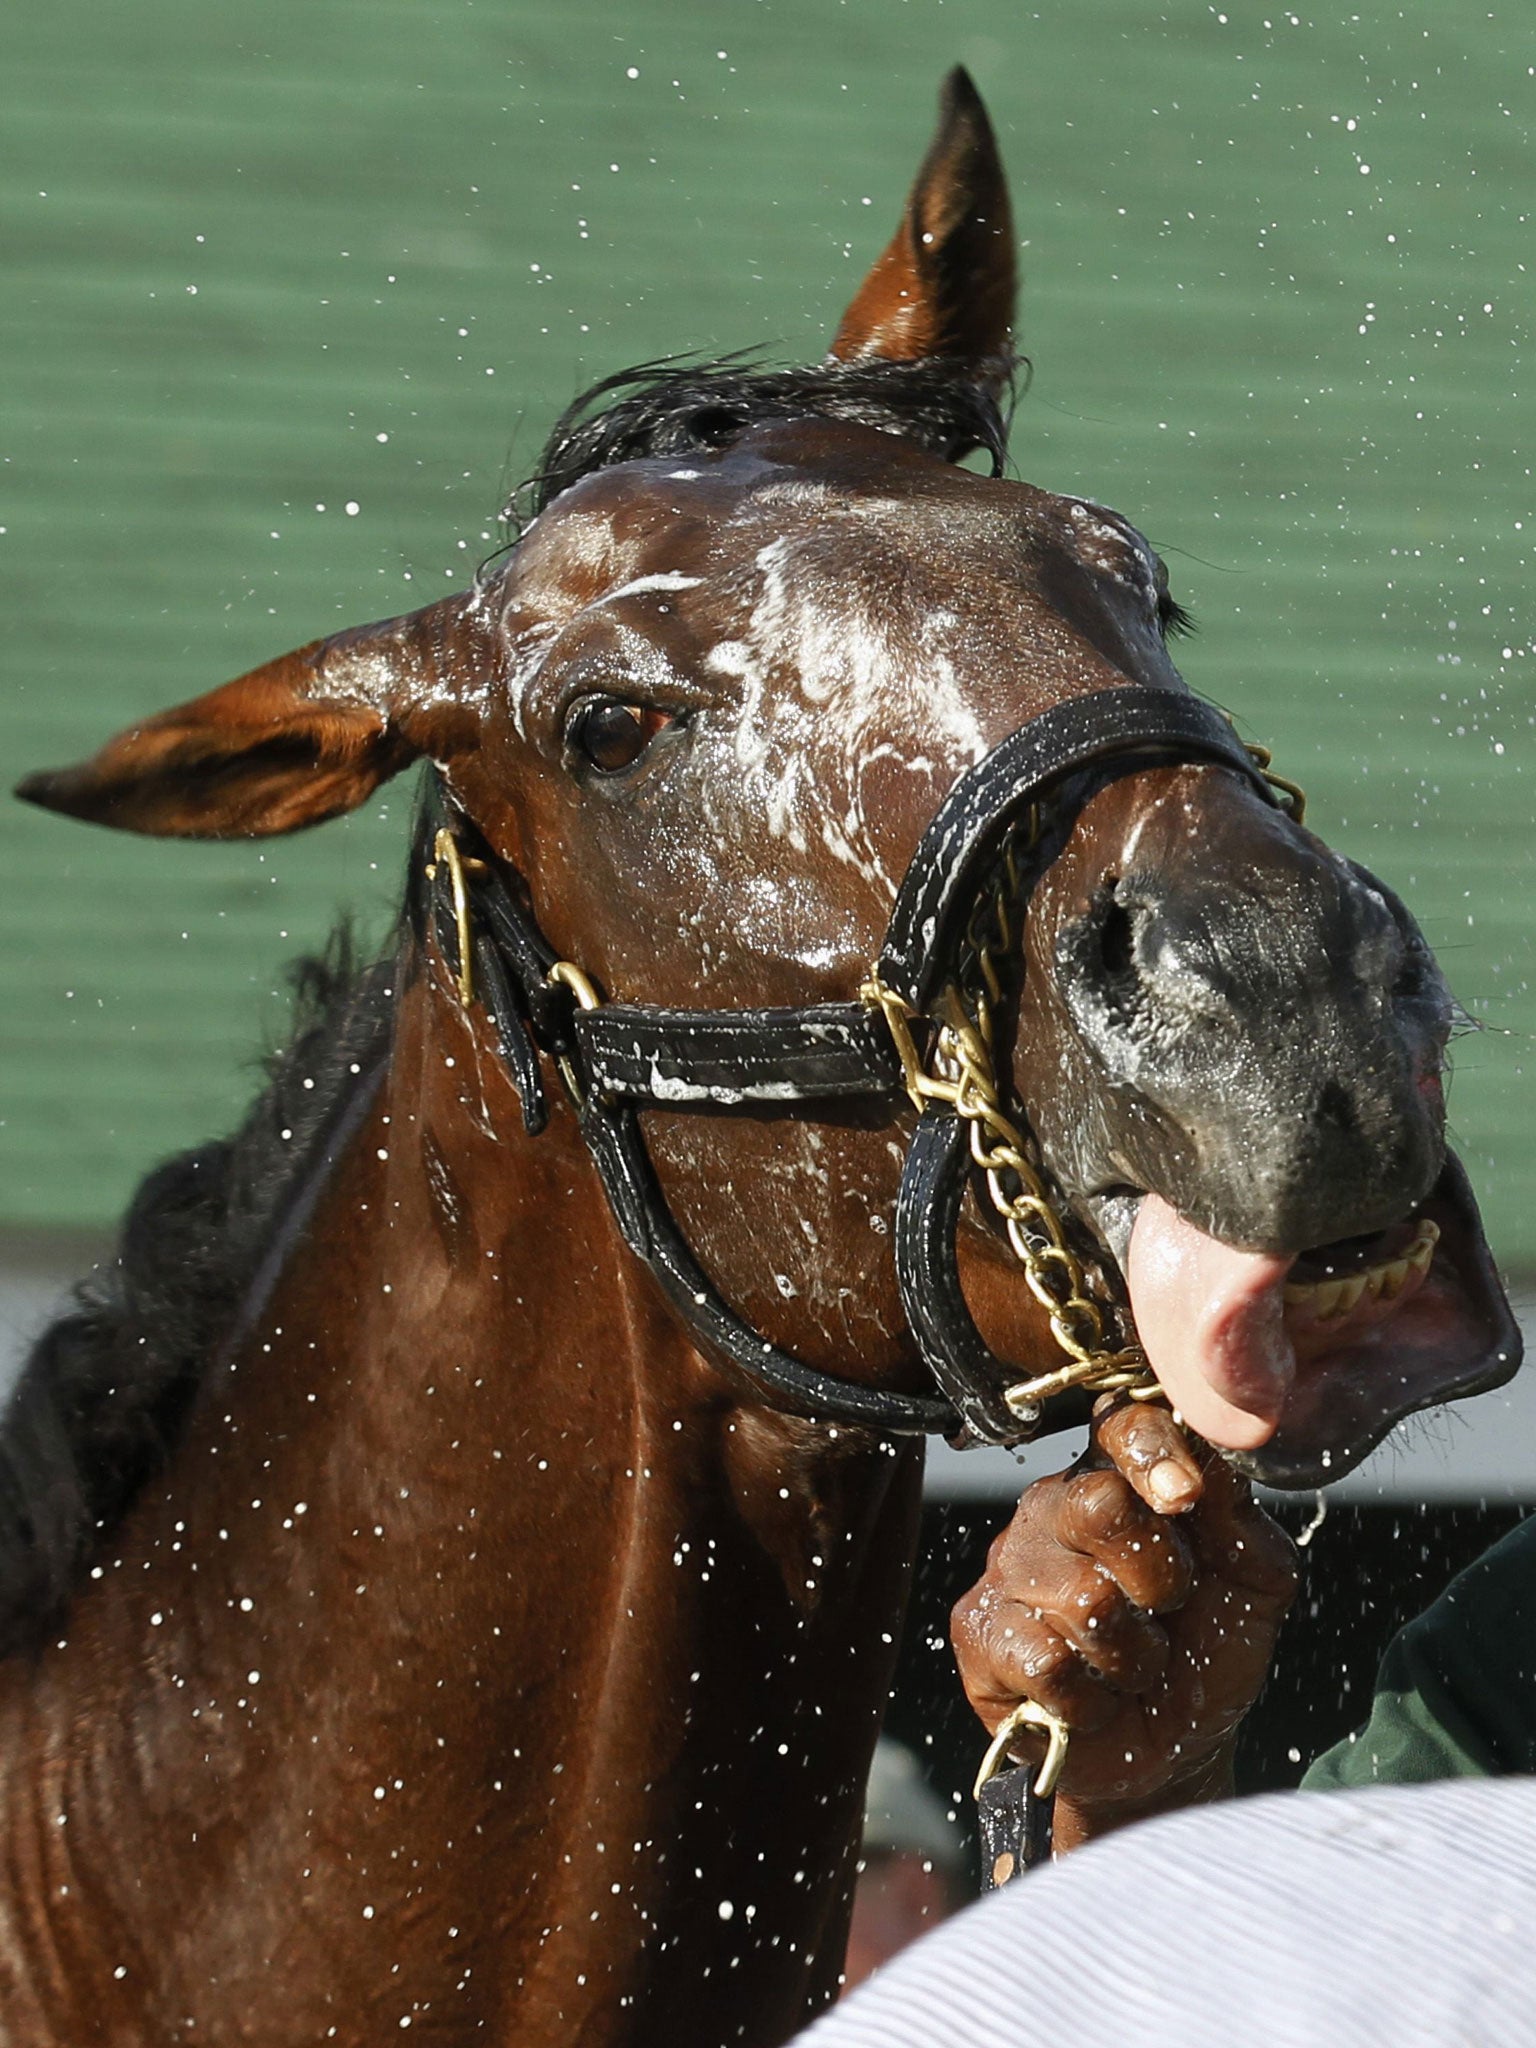 The unbeaten Orb, favourite for the Kentucky Derby, enjoys a hose down after morning gallops